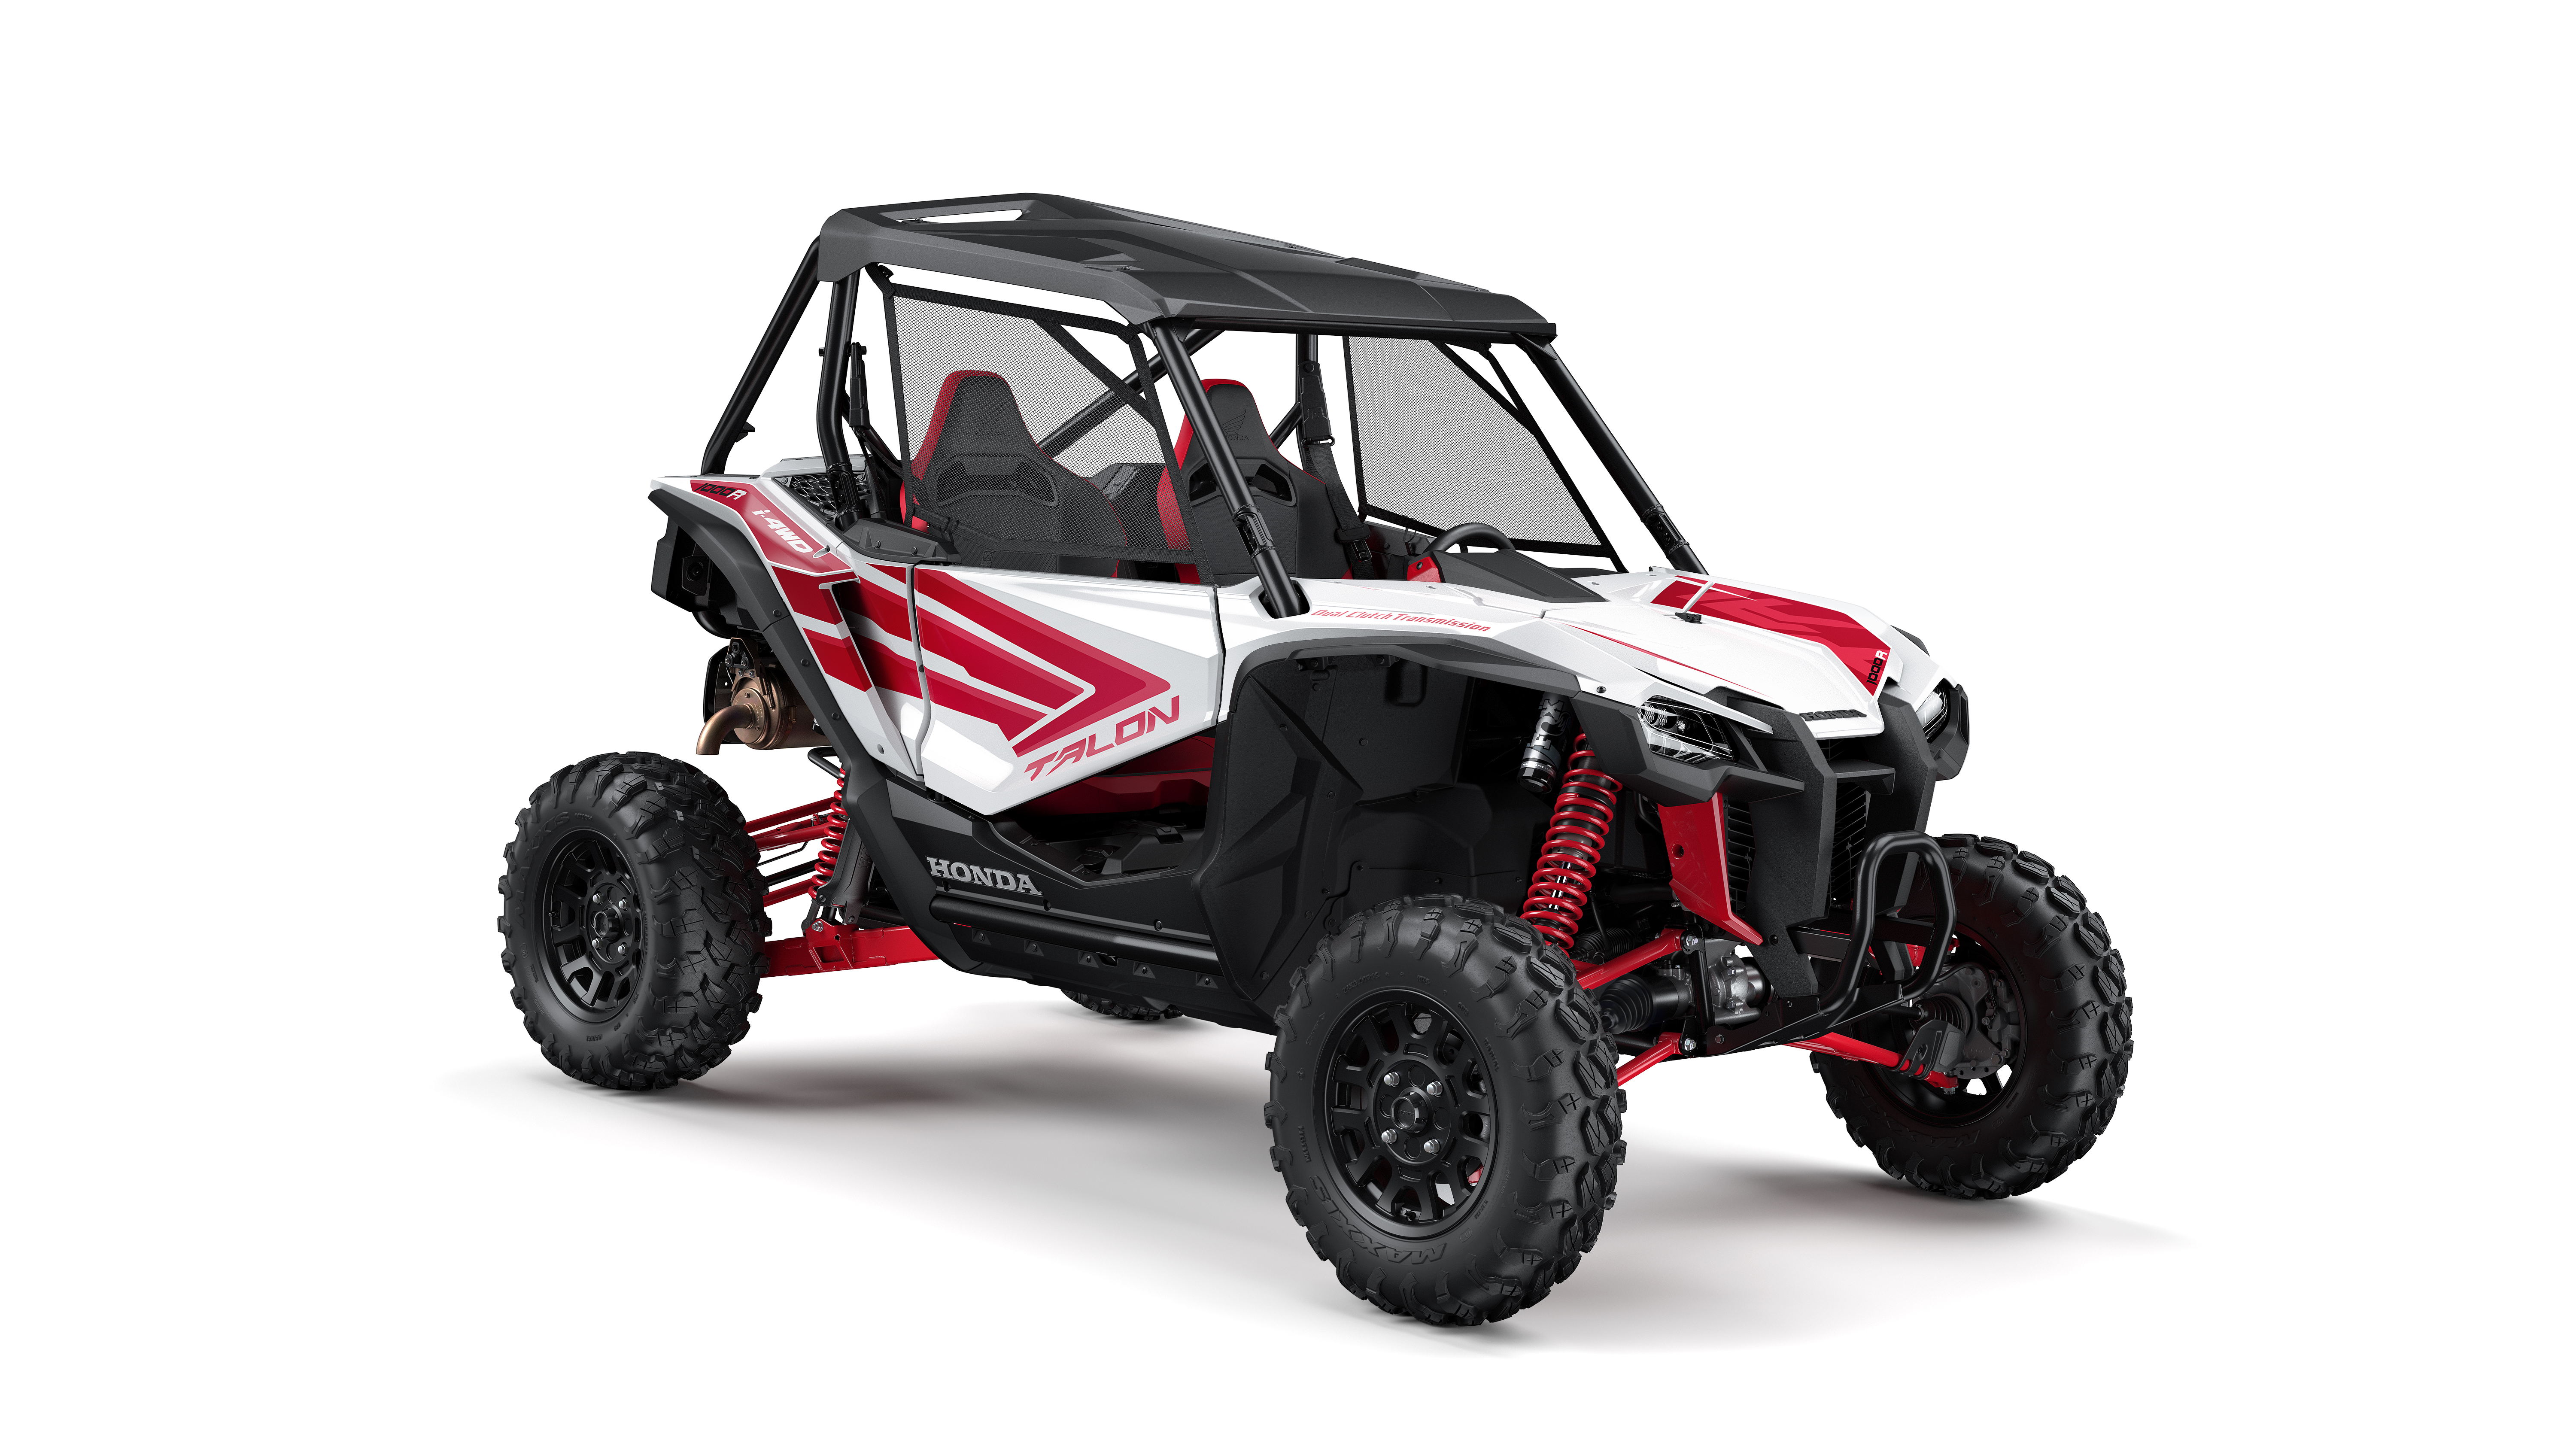 Recalled 2019-2021 Honda Talon 1000 S2 two-seater recreational off-highway vehicle